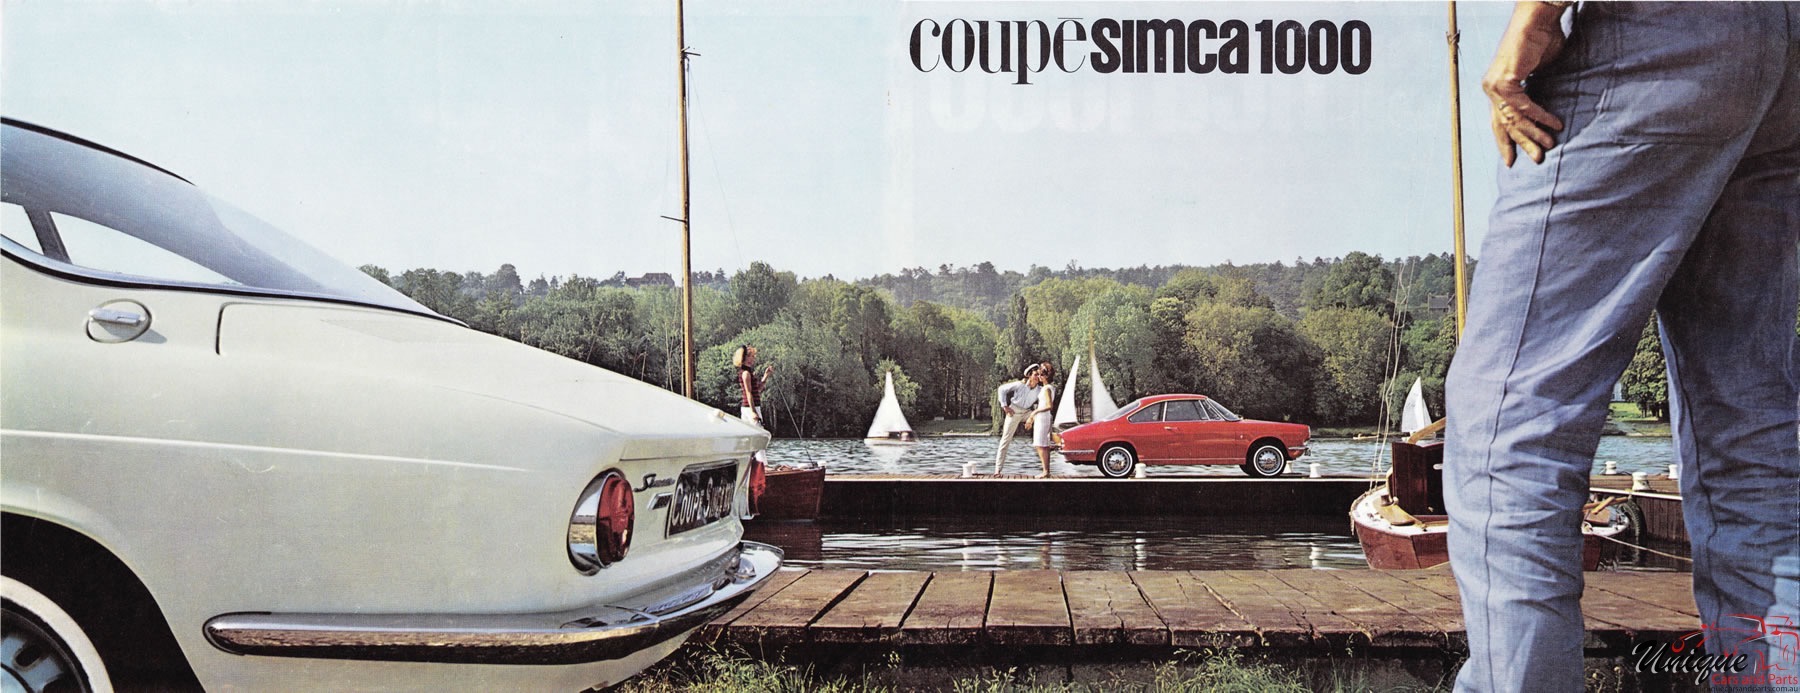 1964 Simca 1000 Coupe (Netherlands) Brochure Page 3